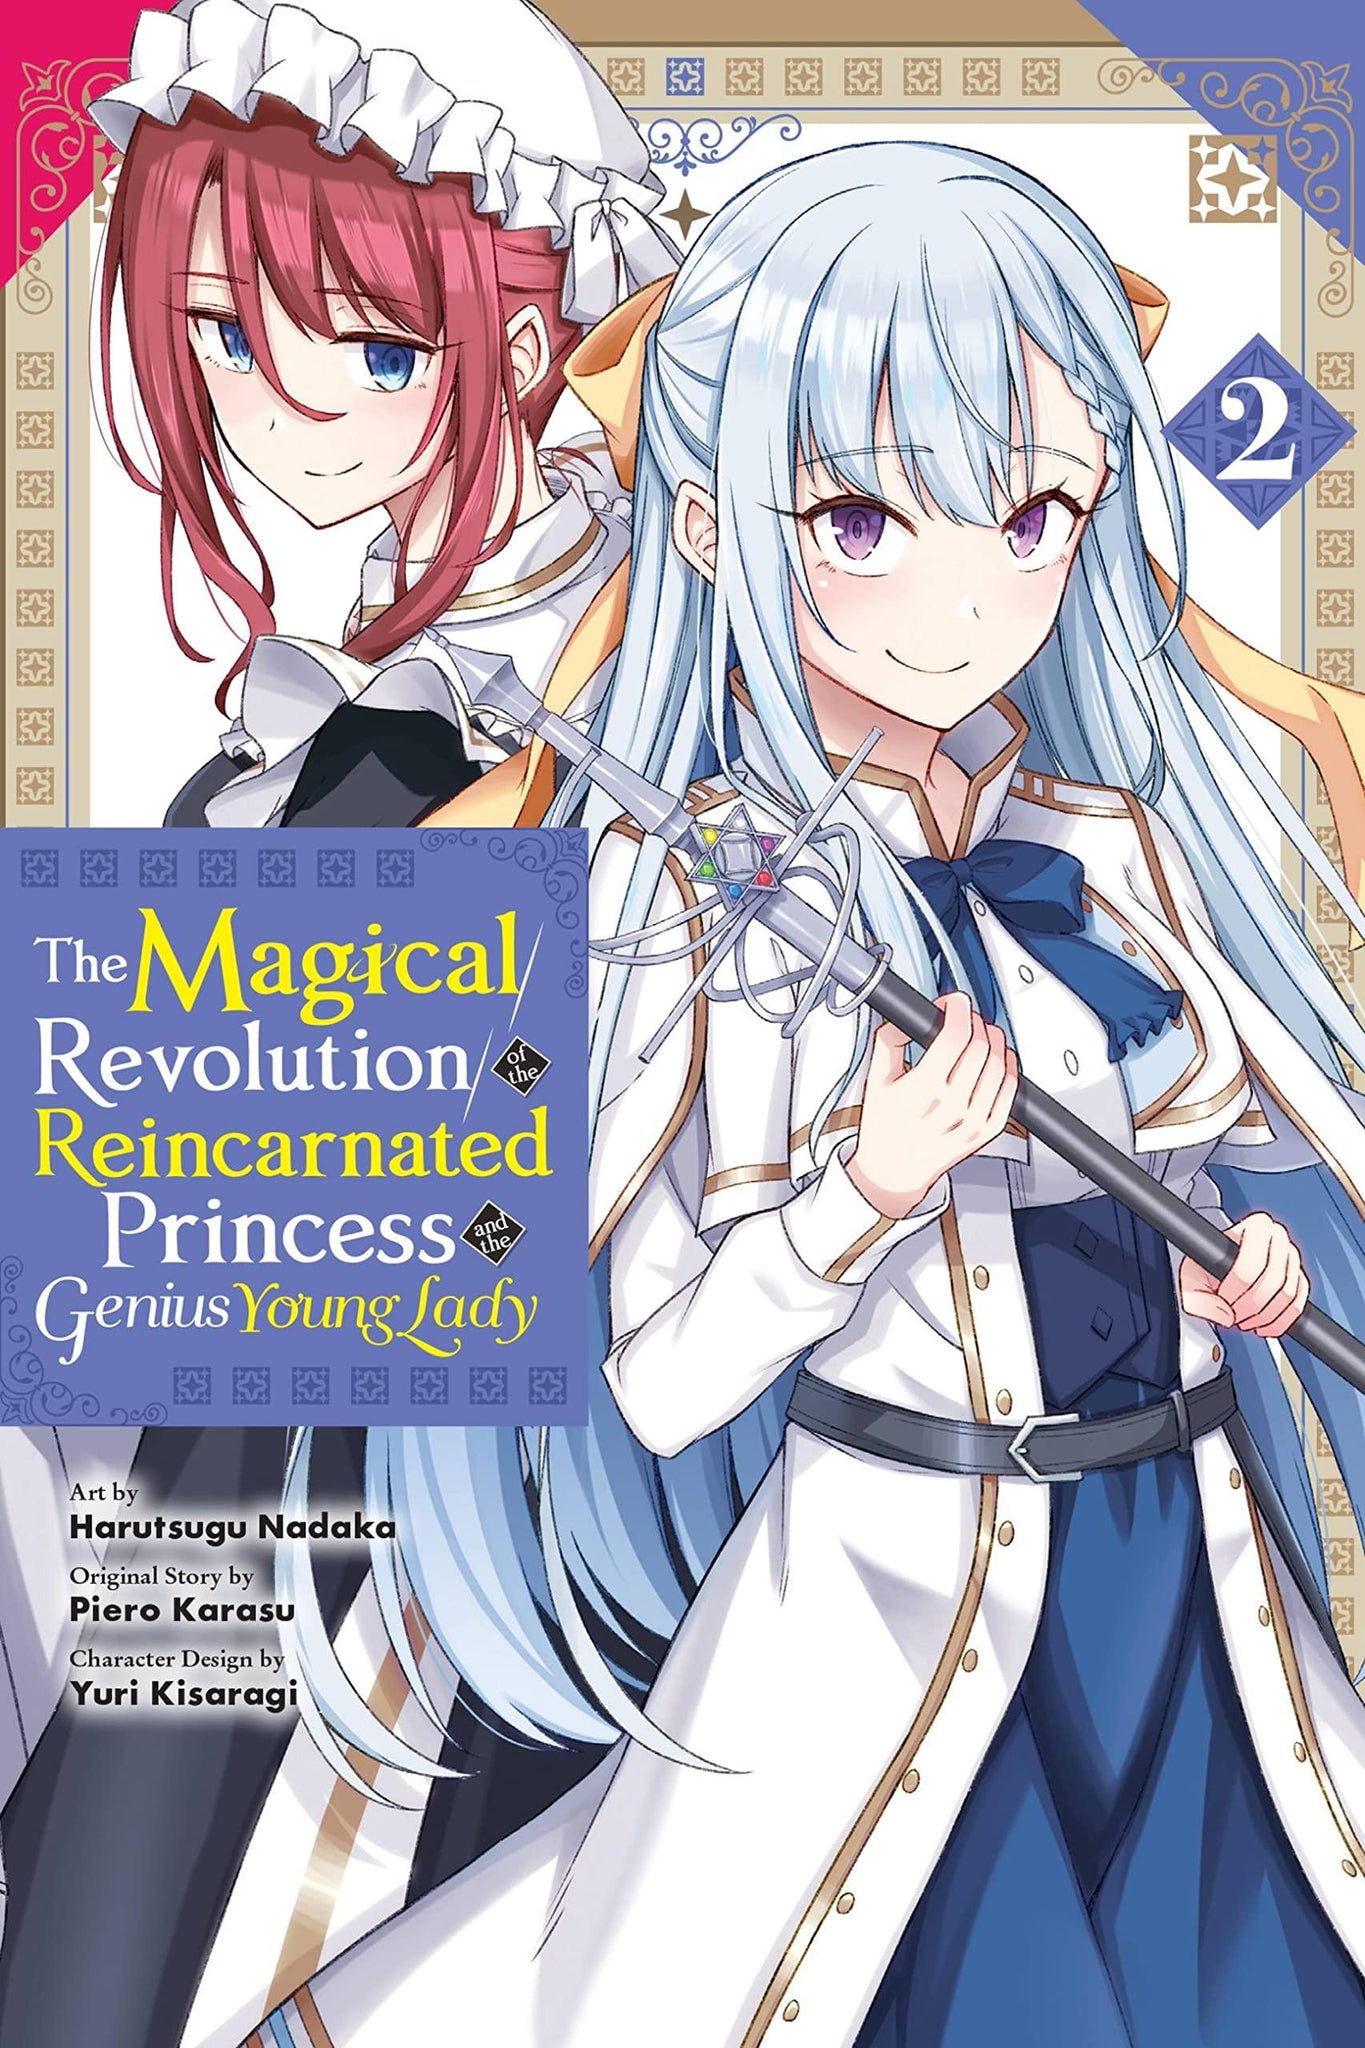 The Magical Revolution of the Reincarnated Princess and the Genius Young Lady, Vol. 2 (Manga) - ShopQueer.co